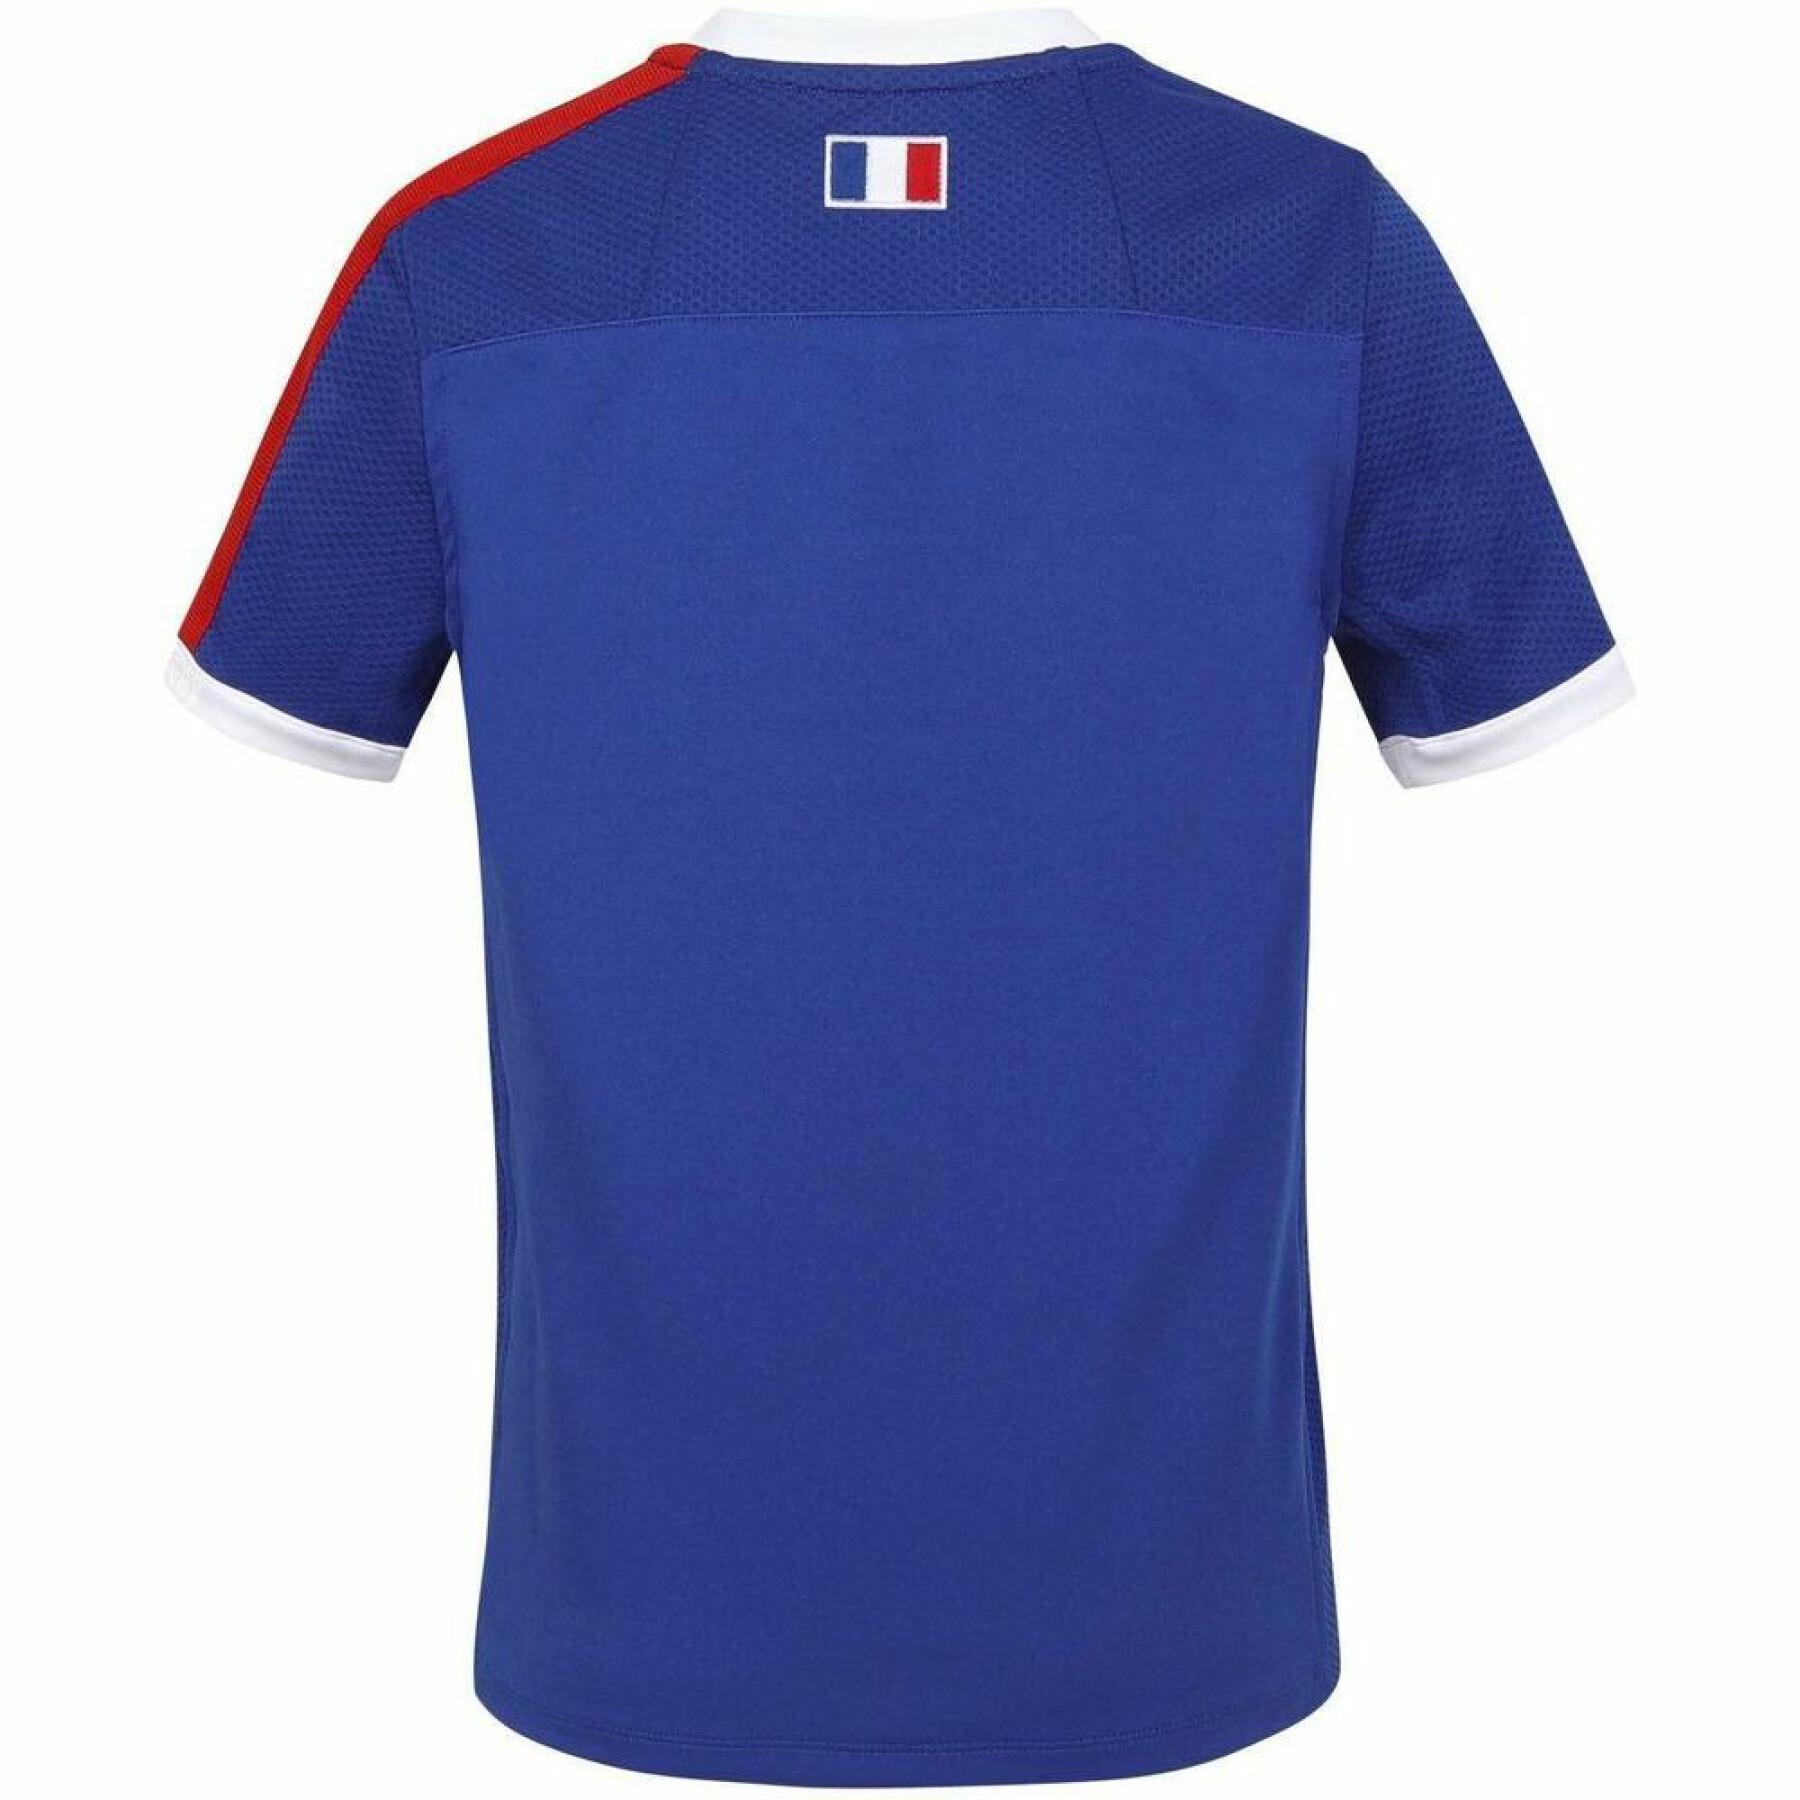 xv jersey from France